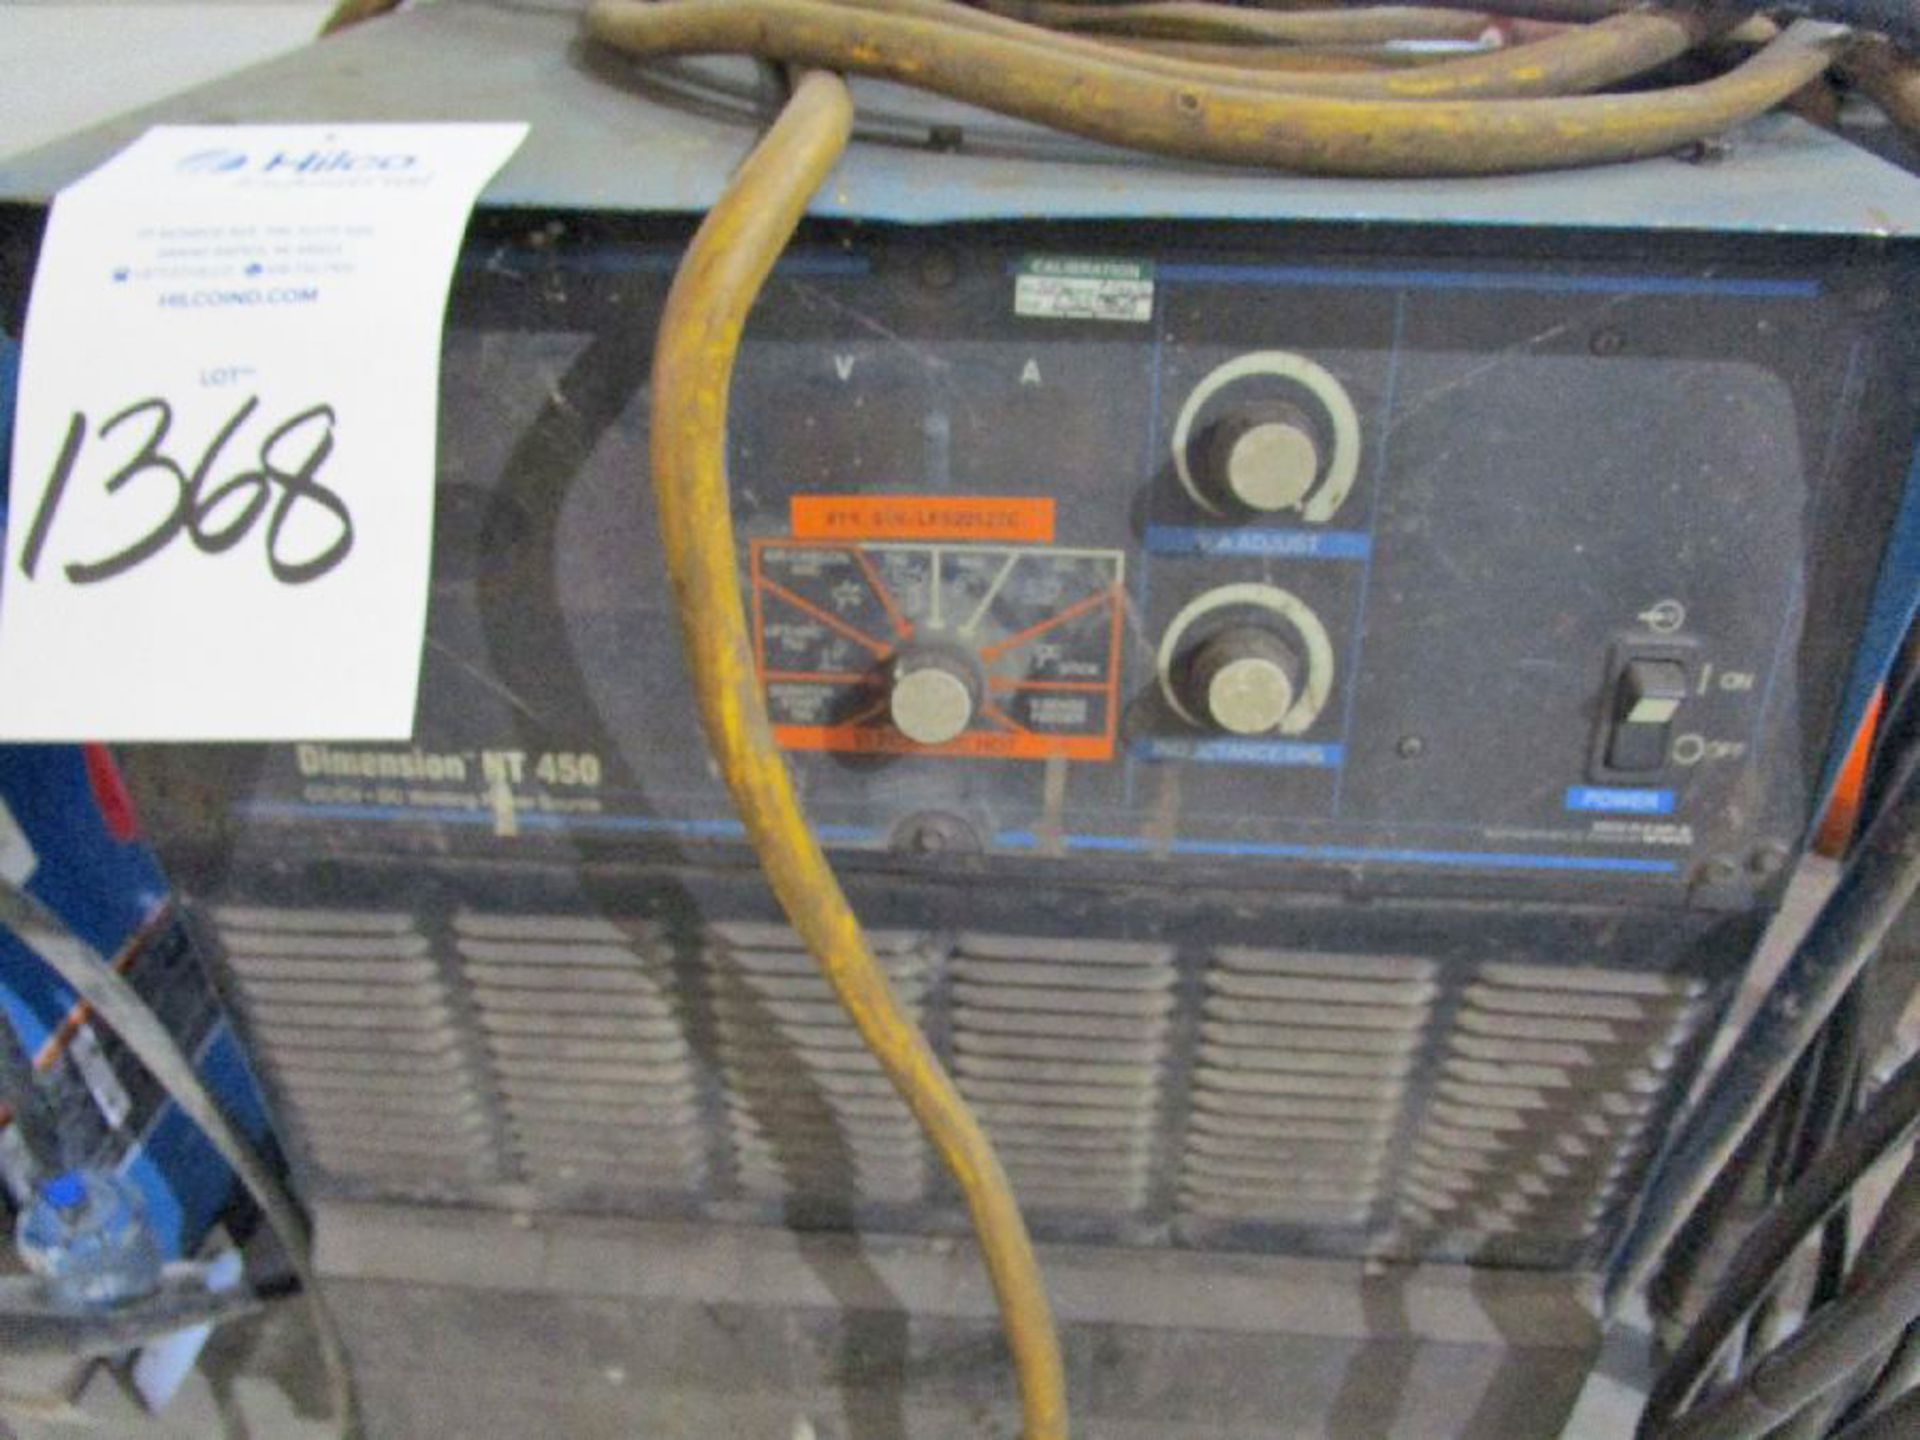 Miller Model Dimention NT 450 Welding Power Source - Image 2 of 6